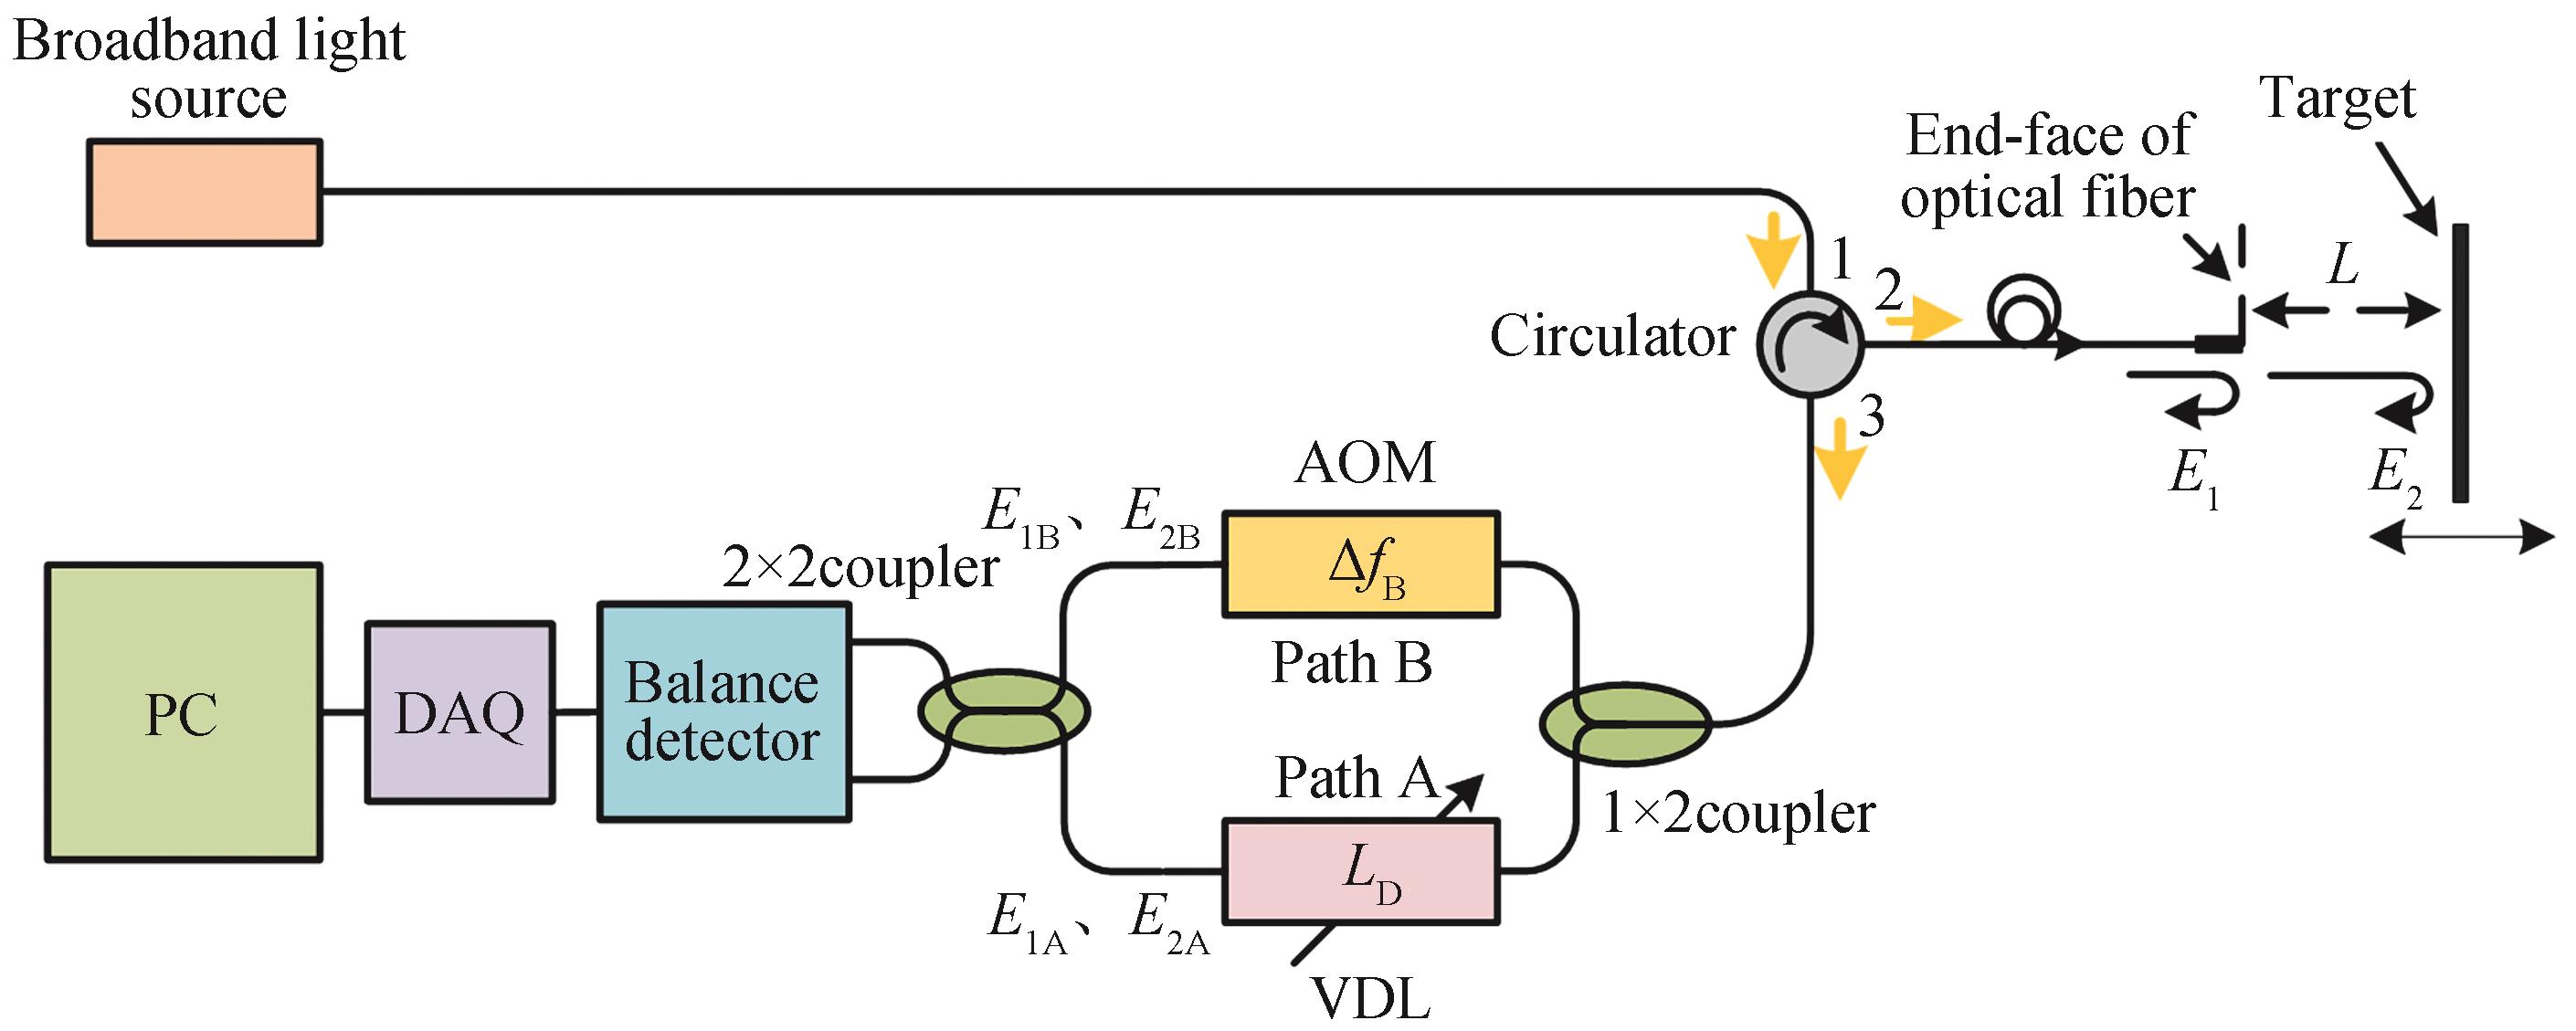 Schematic diagram of low-coherence heterodyne interference clearance measurement based on differential detection